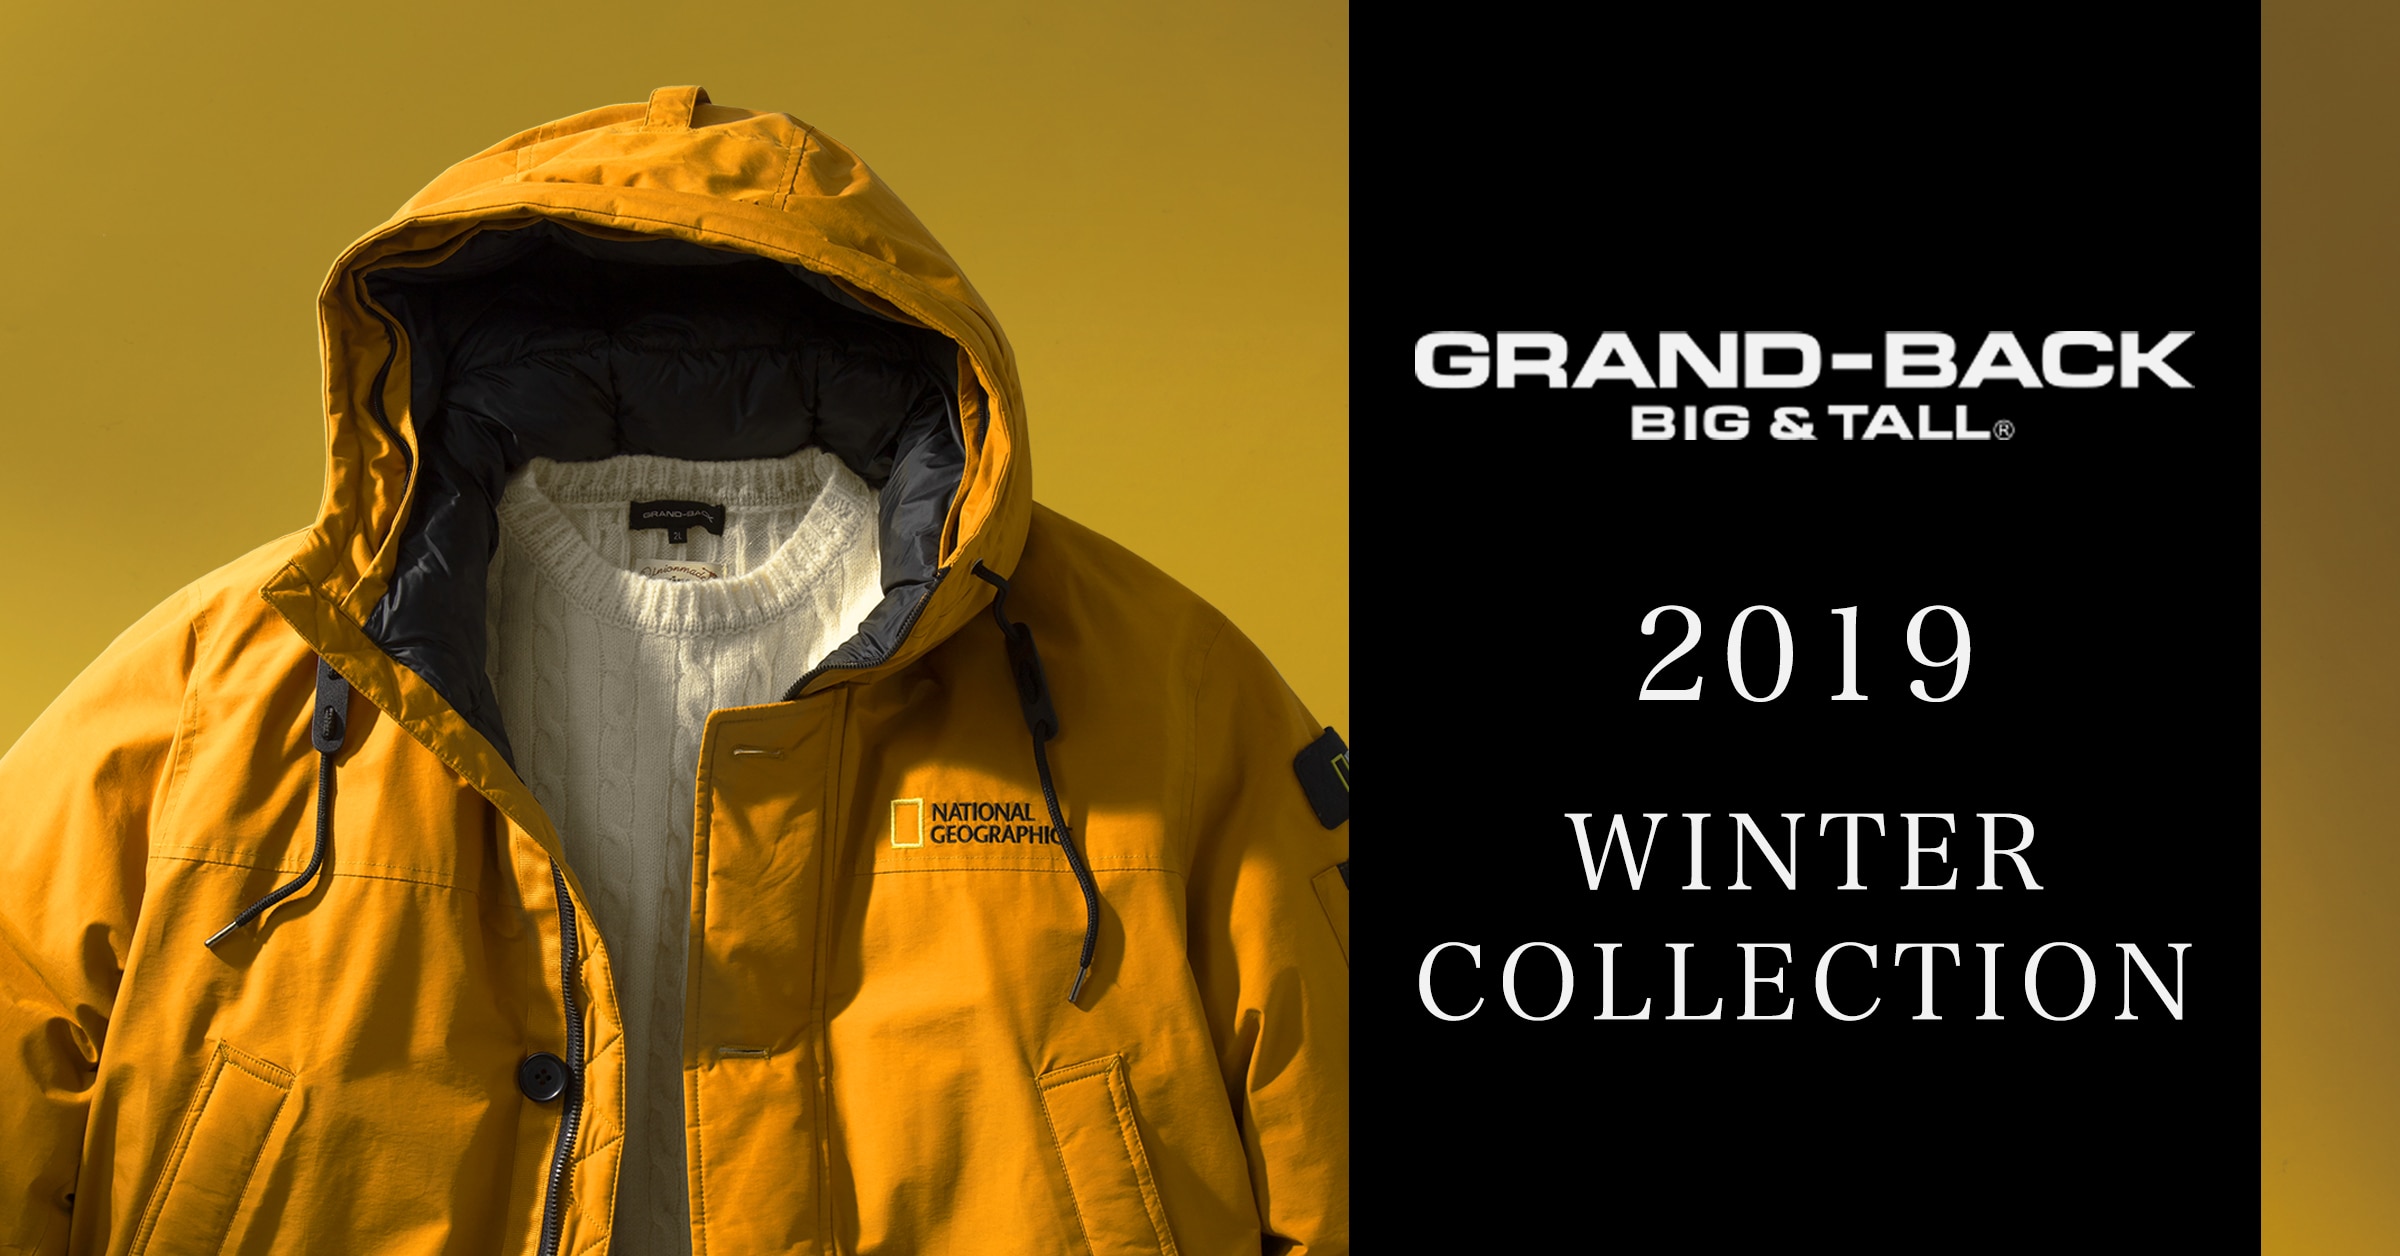 GRAND BACK 2019 WINTER COLLECTION